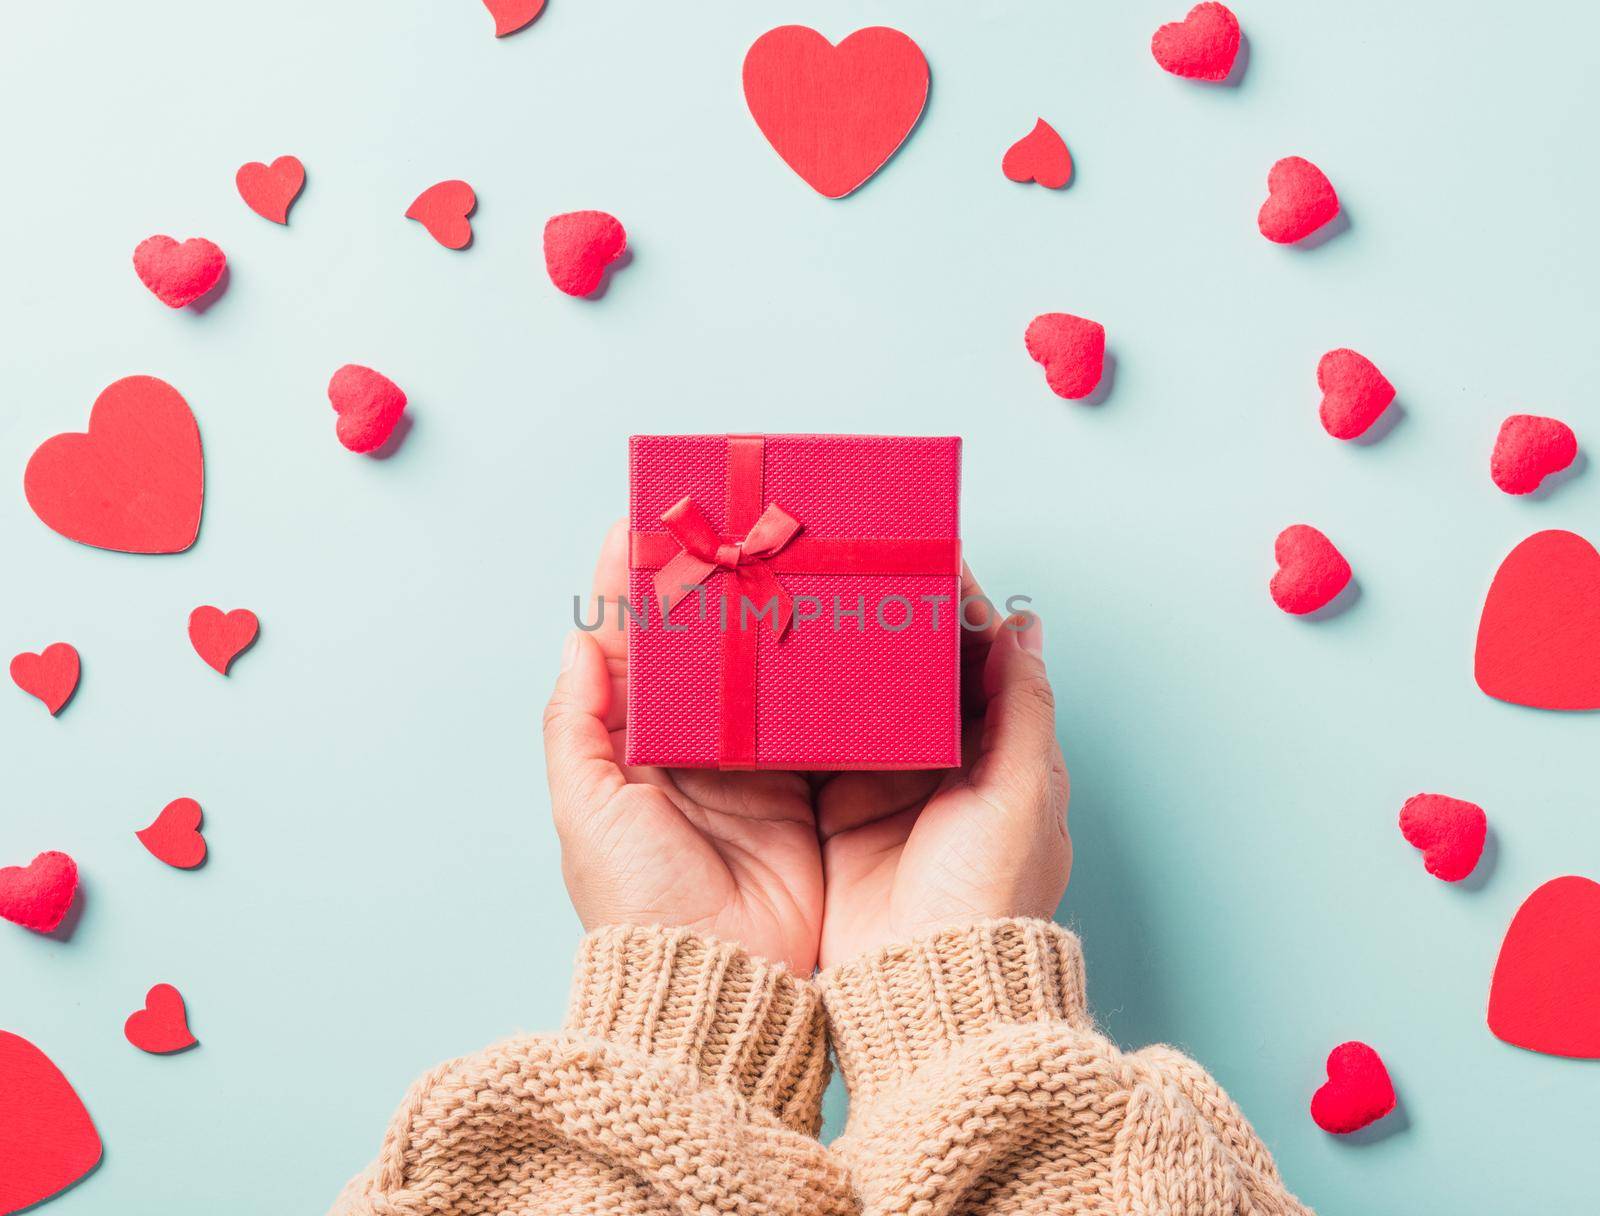 Woman hands holding gift or present box decorated and red heart surprise by Sorapop